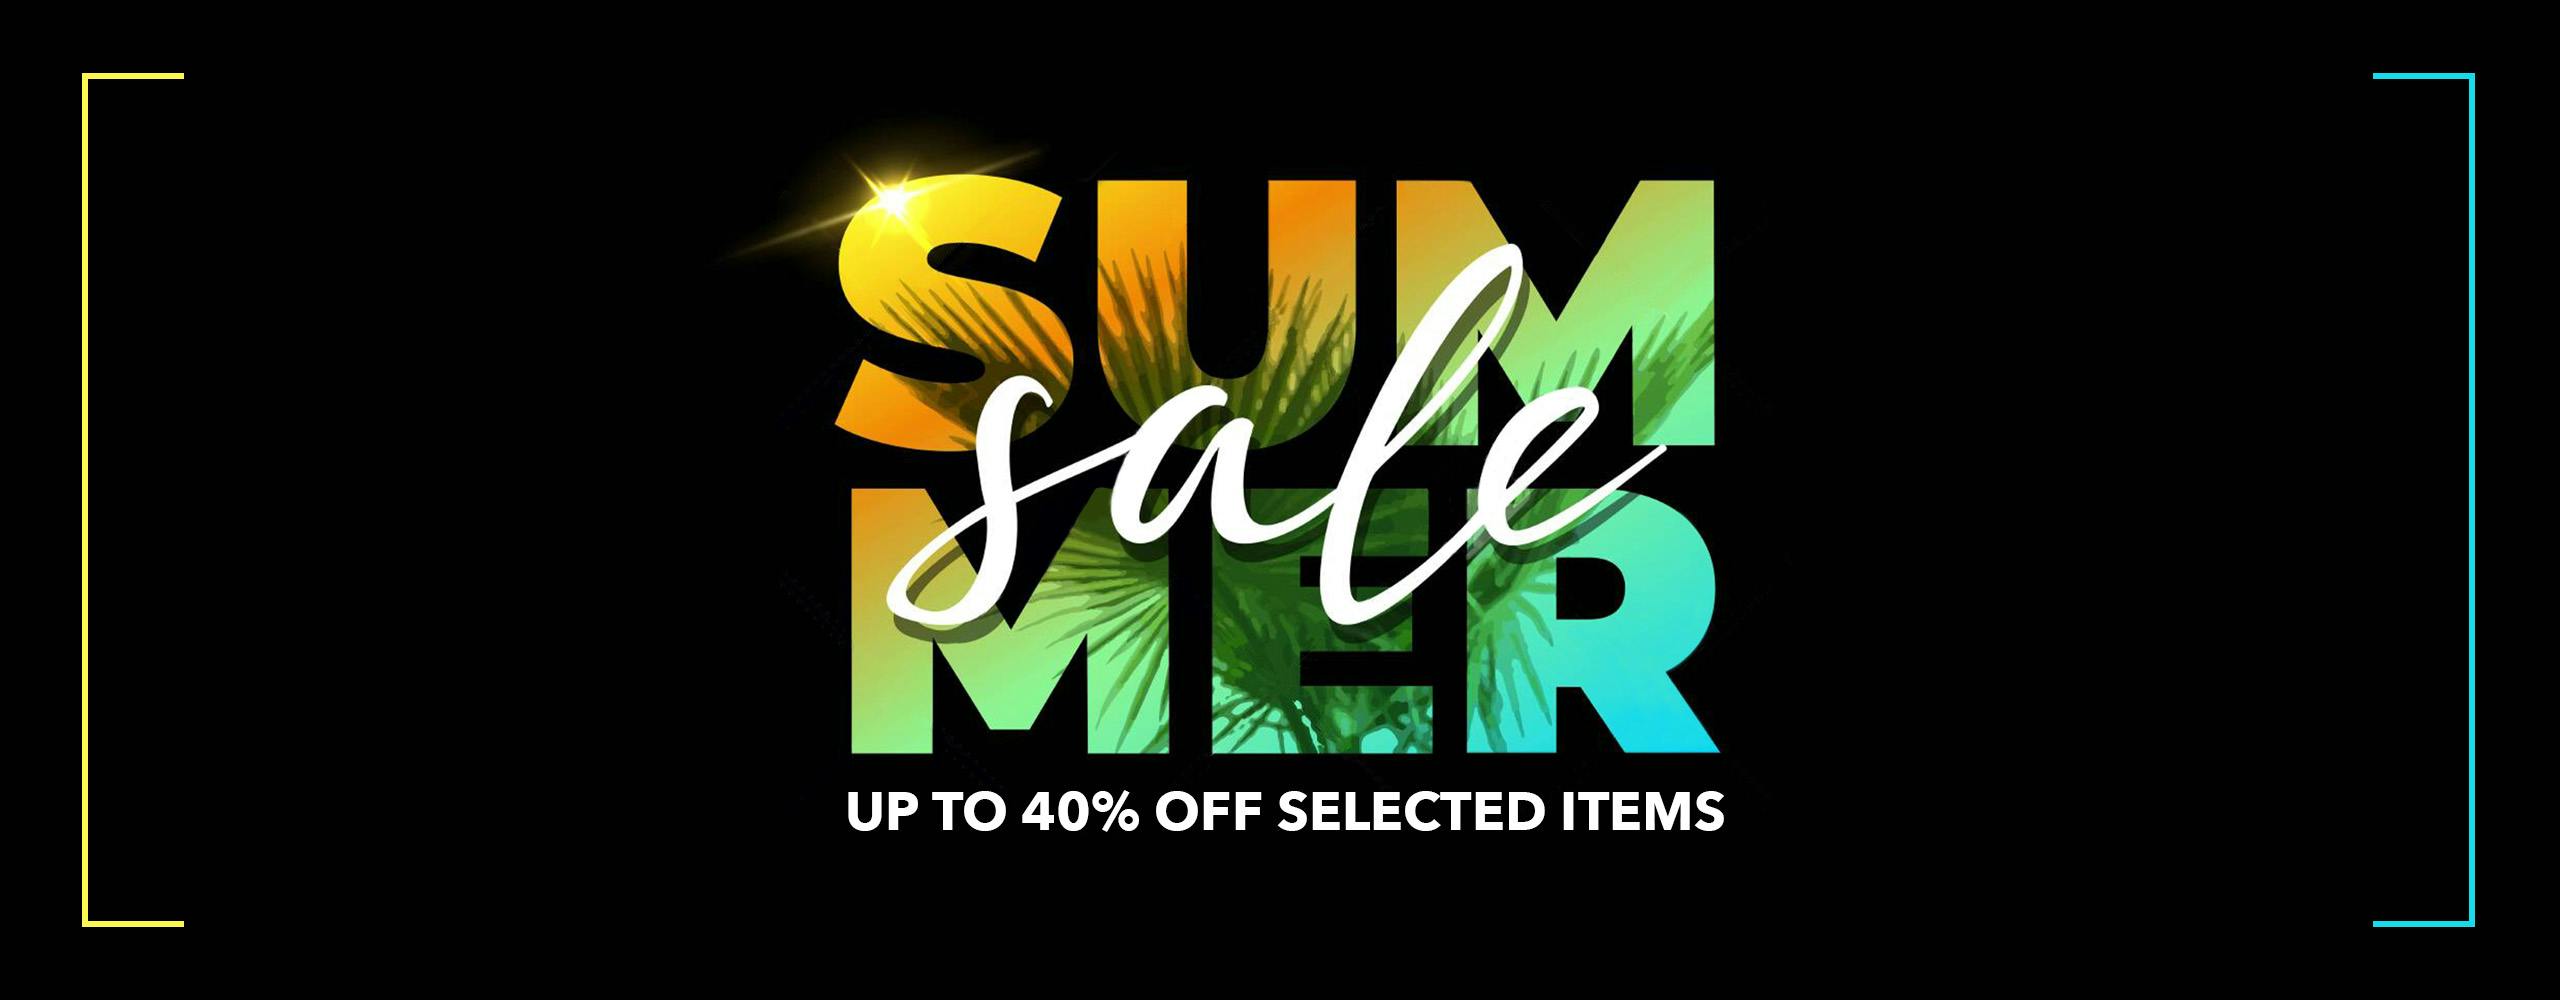 Summer Sale! 25% OFF Selected Items at Blitz.